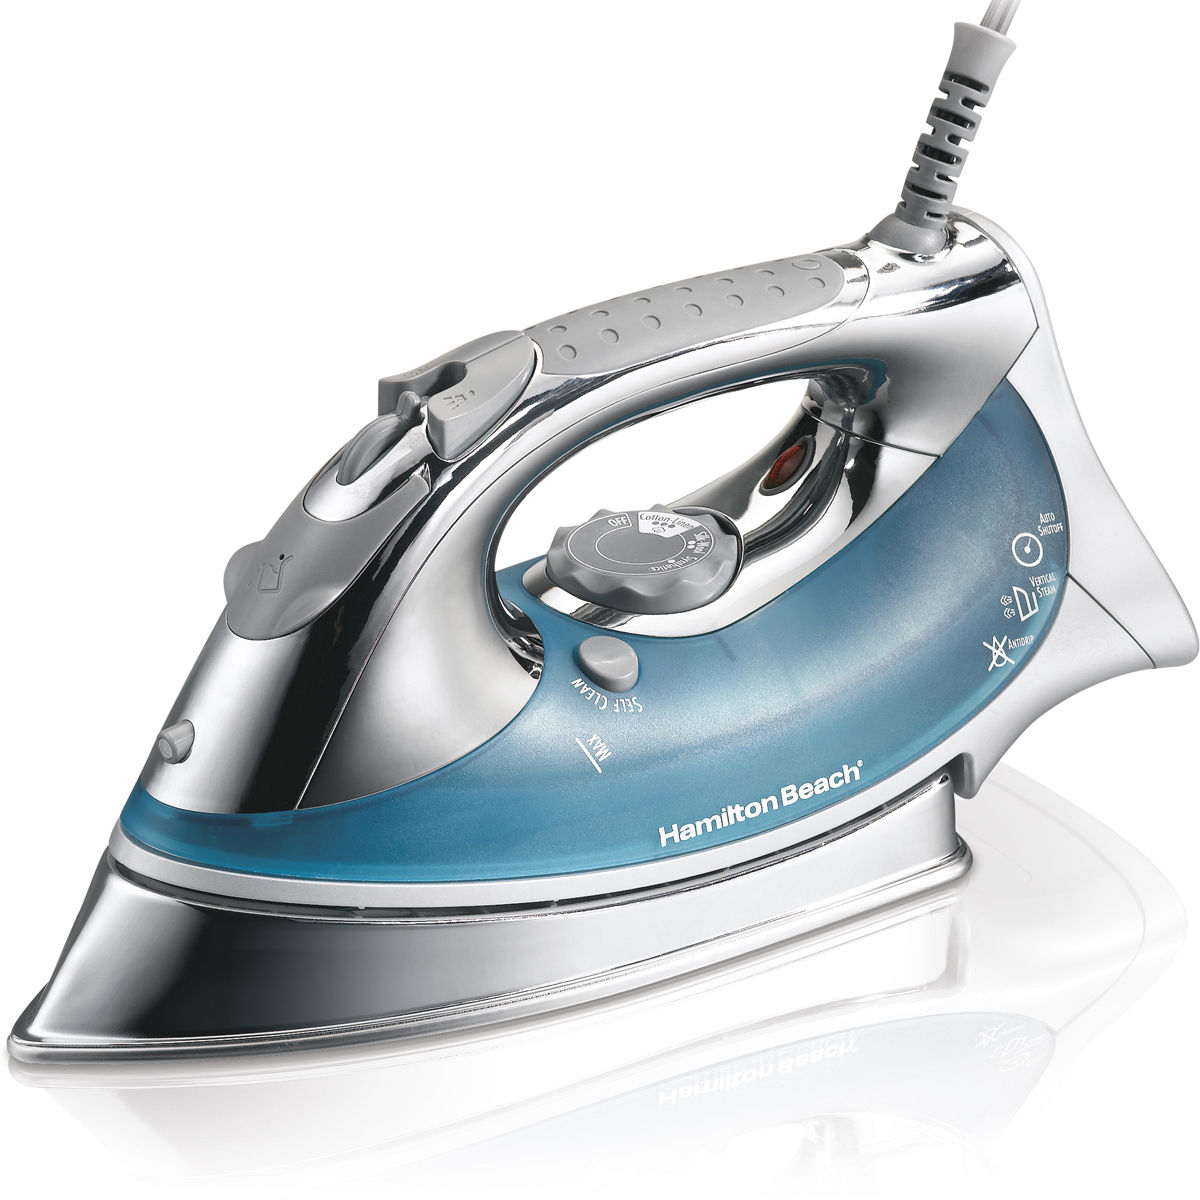 Stainless Steel Professional Iron (14551)